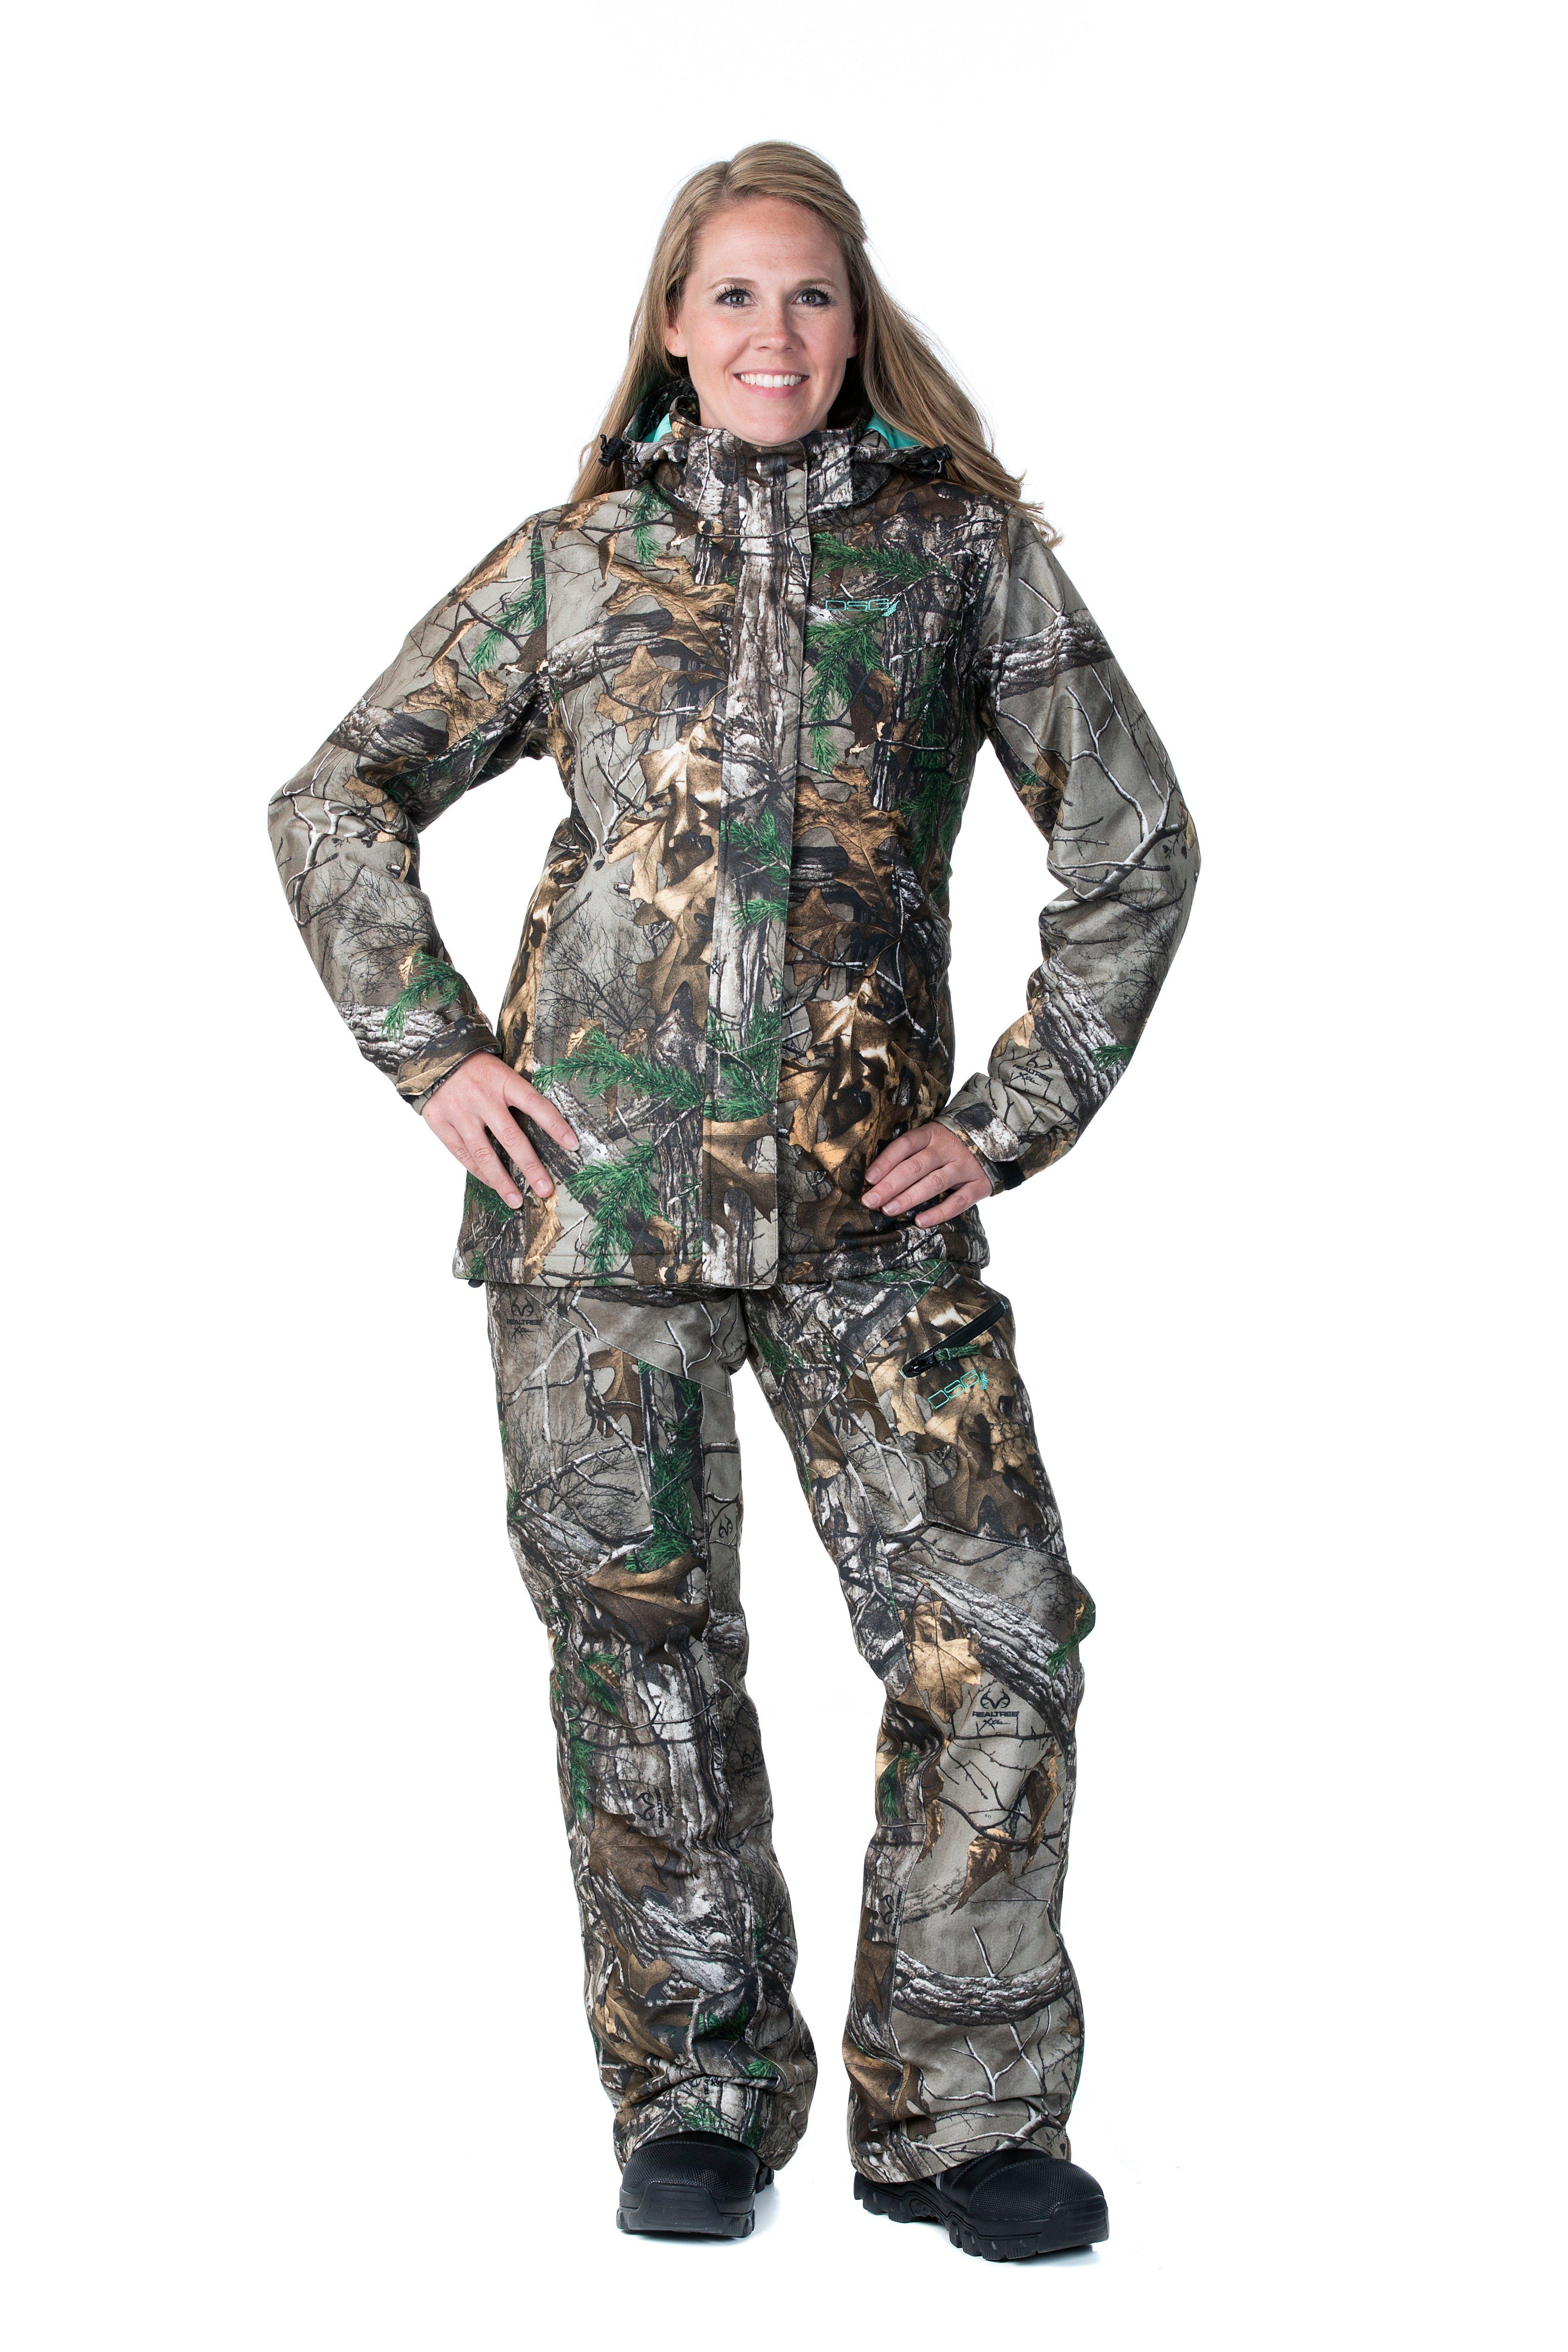 DSG Coldweather Gear Jackets and Bibs in Realtree Xtra